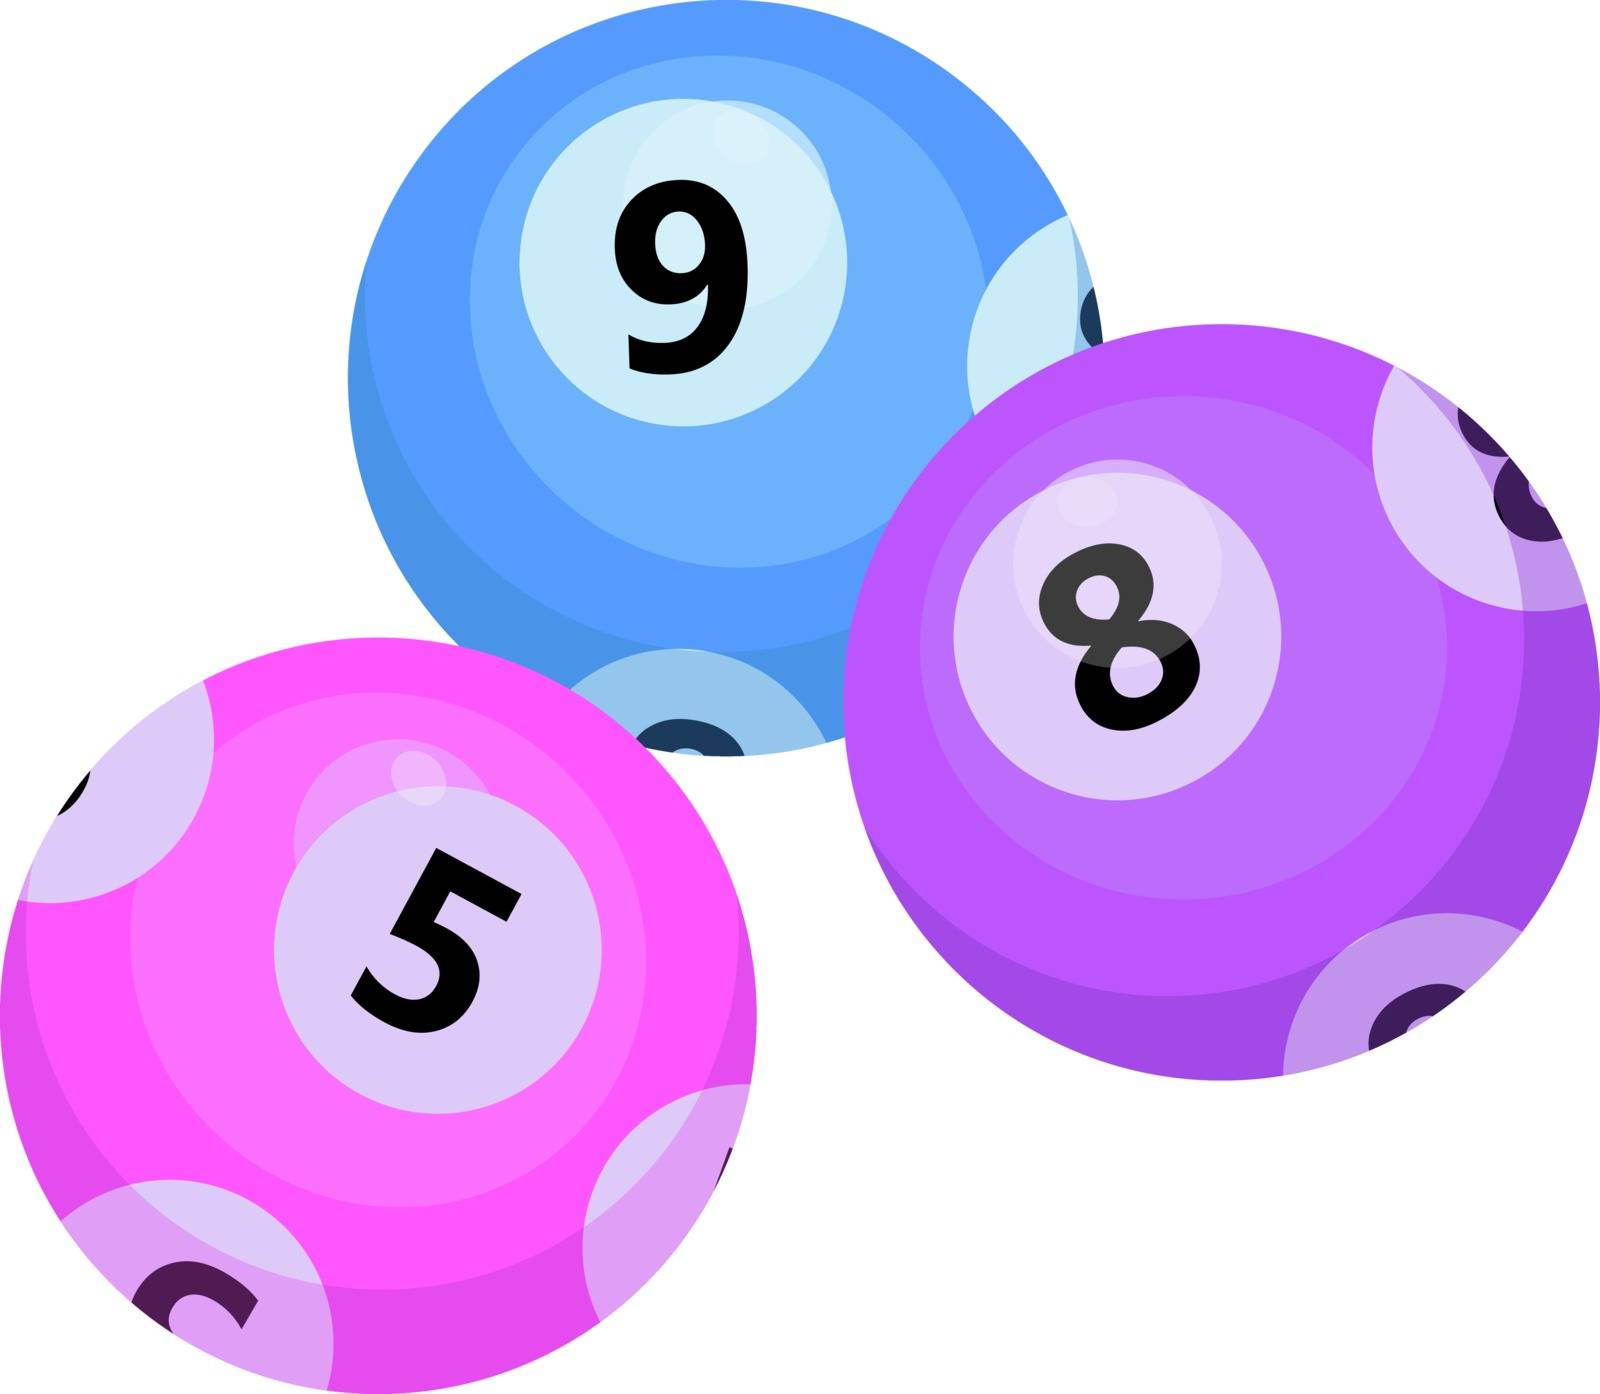 Balls with lotto bingo numbers, lottery numbered balls for keno game, icon flat style. Isolated on a white background. Vector illustration by lucia_fox